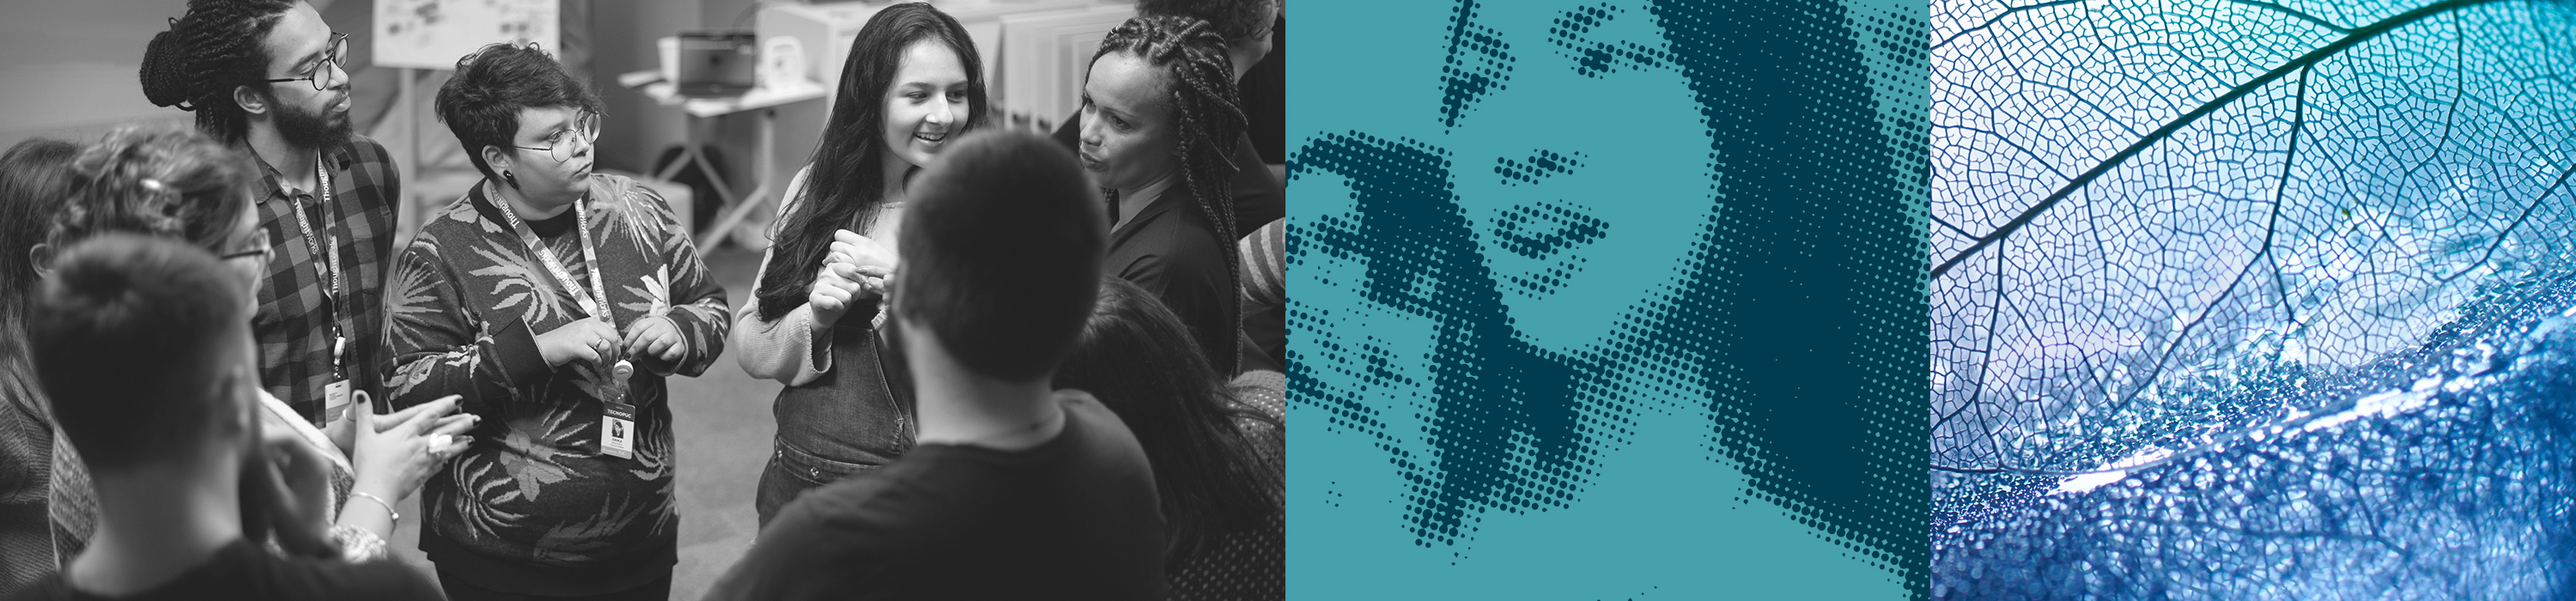 Decorative image panel: black and white photo of a group of Brazilian Thoughtworkers in a stand up, a pixellated image of a woman raising her voice, a close up of a skeletal leaf